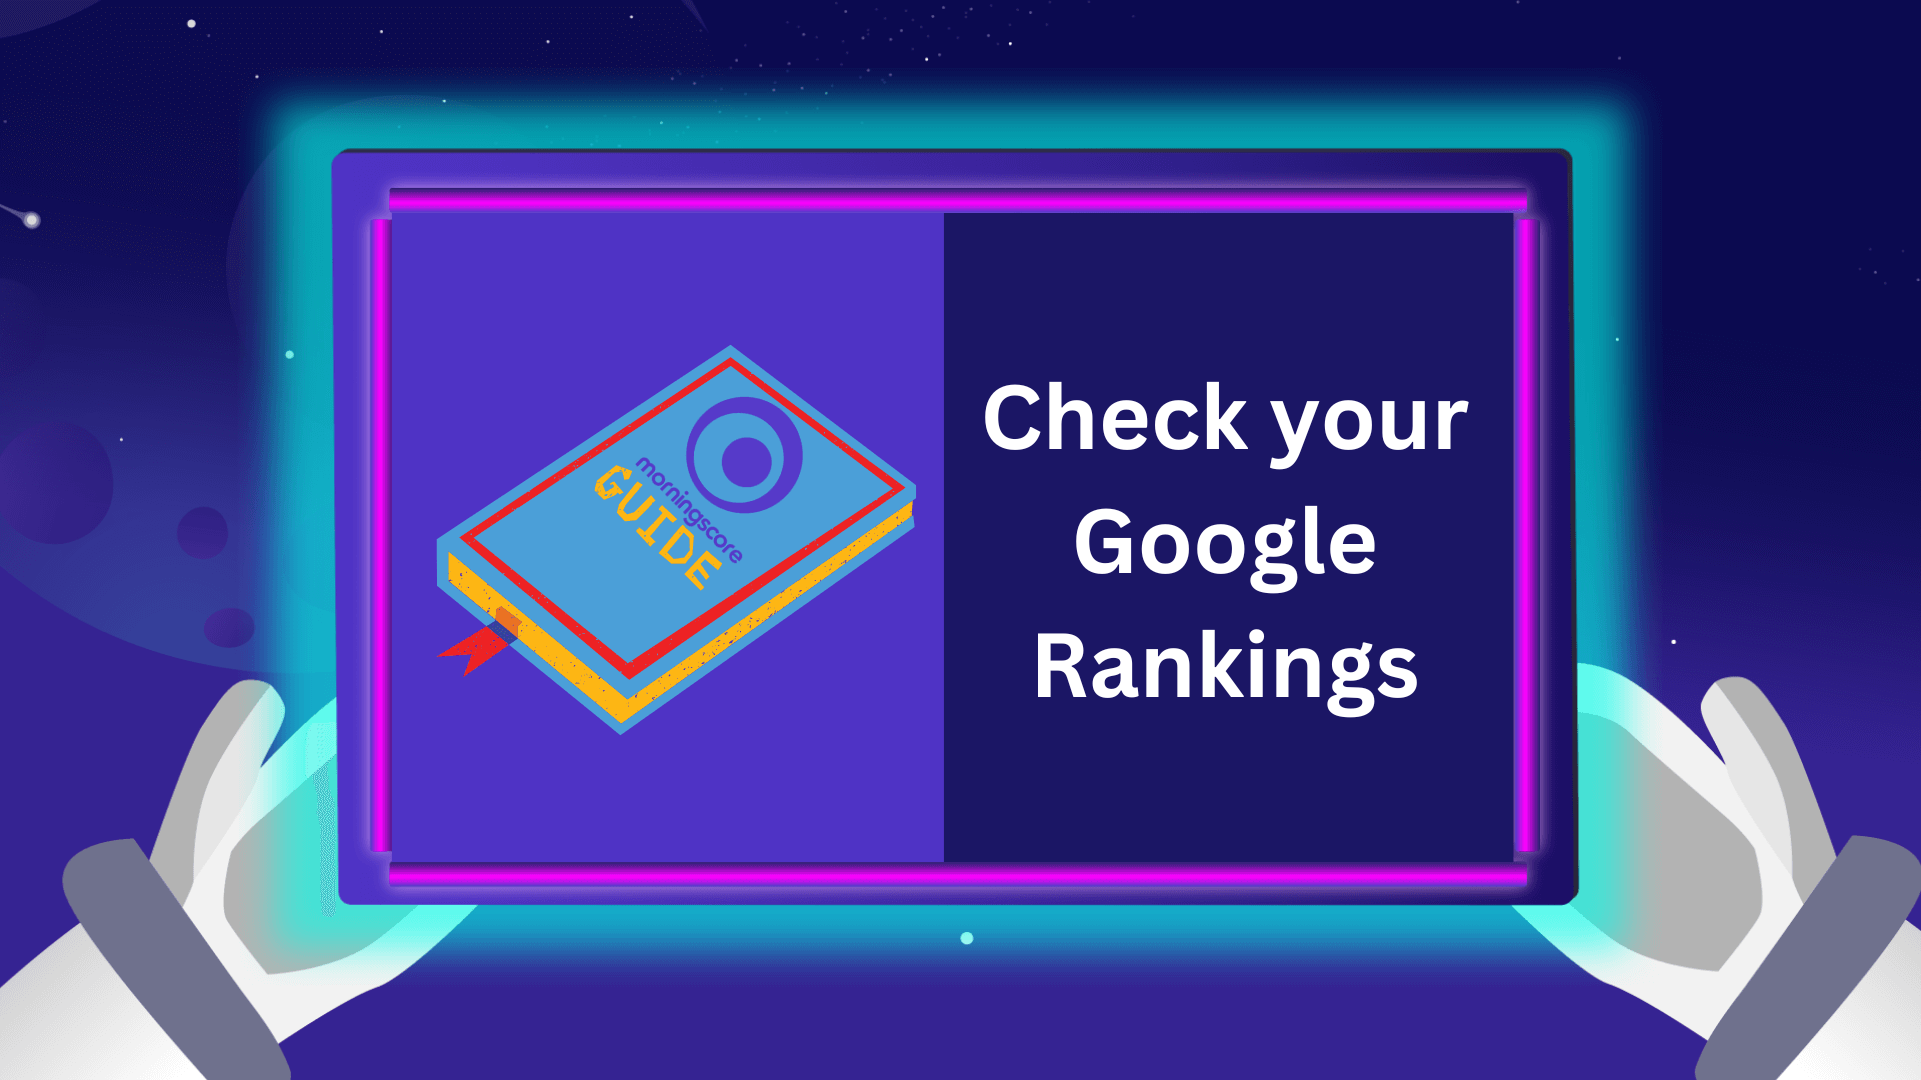 Find your Google rankings in Morningscore, by following this guide.